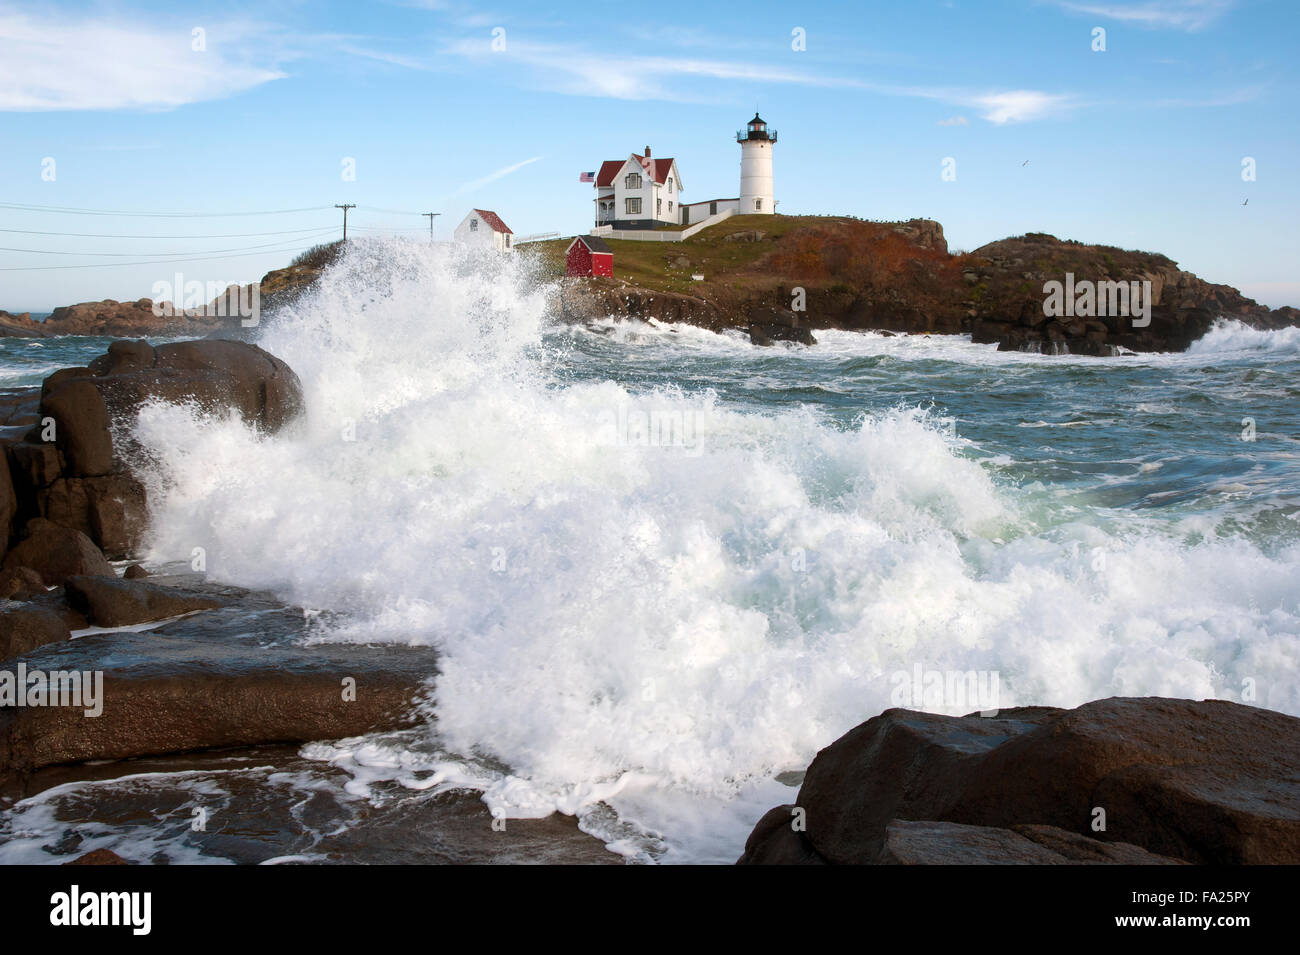 Waves crashing along the rocky shoreline near Nubble lighthouse in Maine at high tide. It is one of the most photographed attractions on the seacoast. Stock Photo